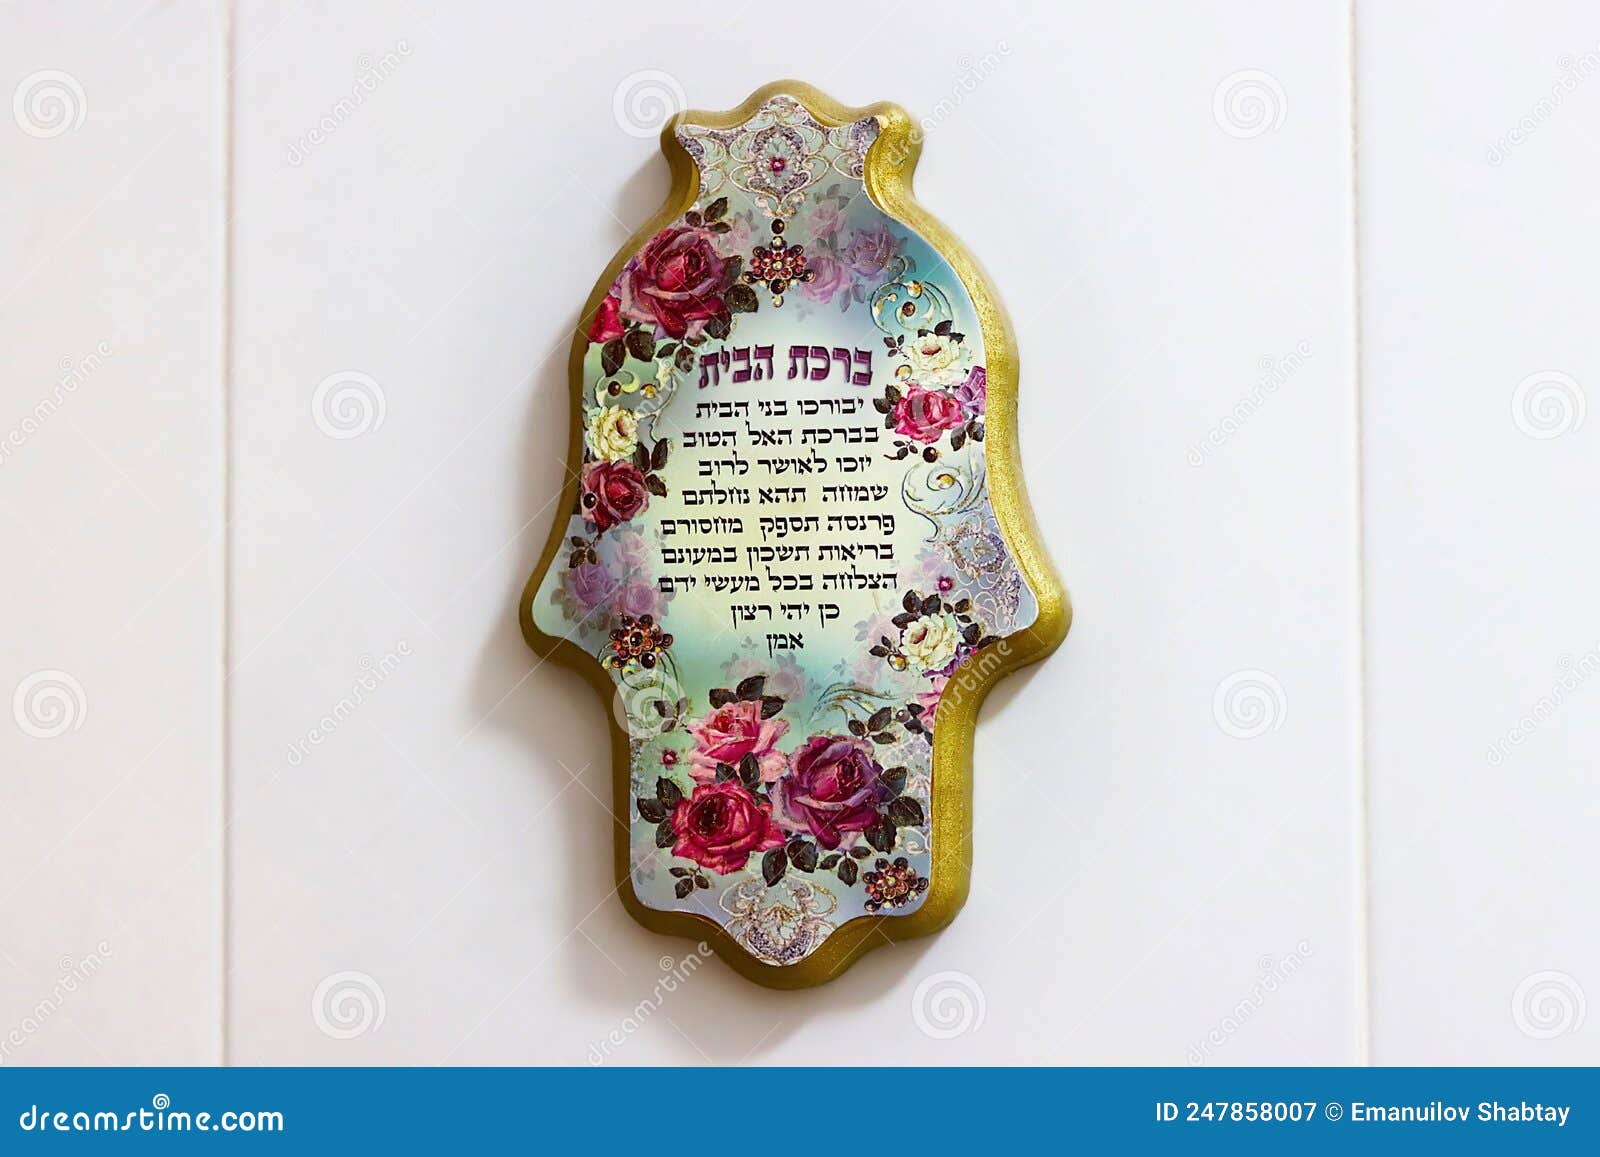 birkat-habayit-hebrew-blessing-for-the-home-birkat-habayit-in-the